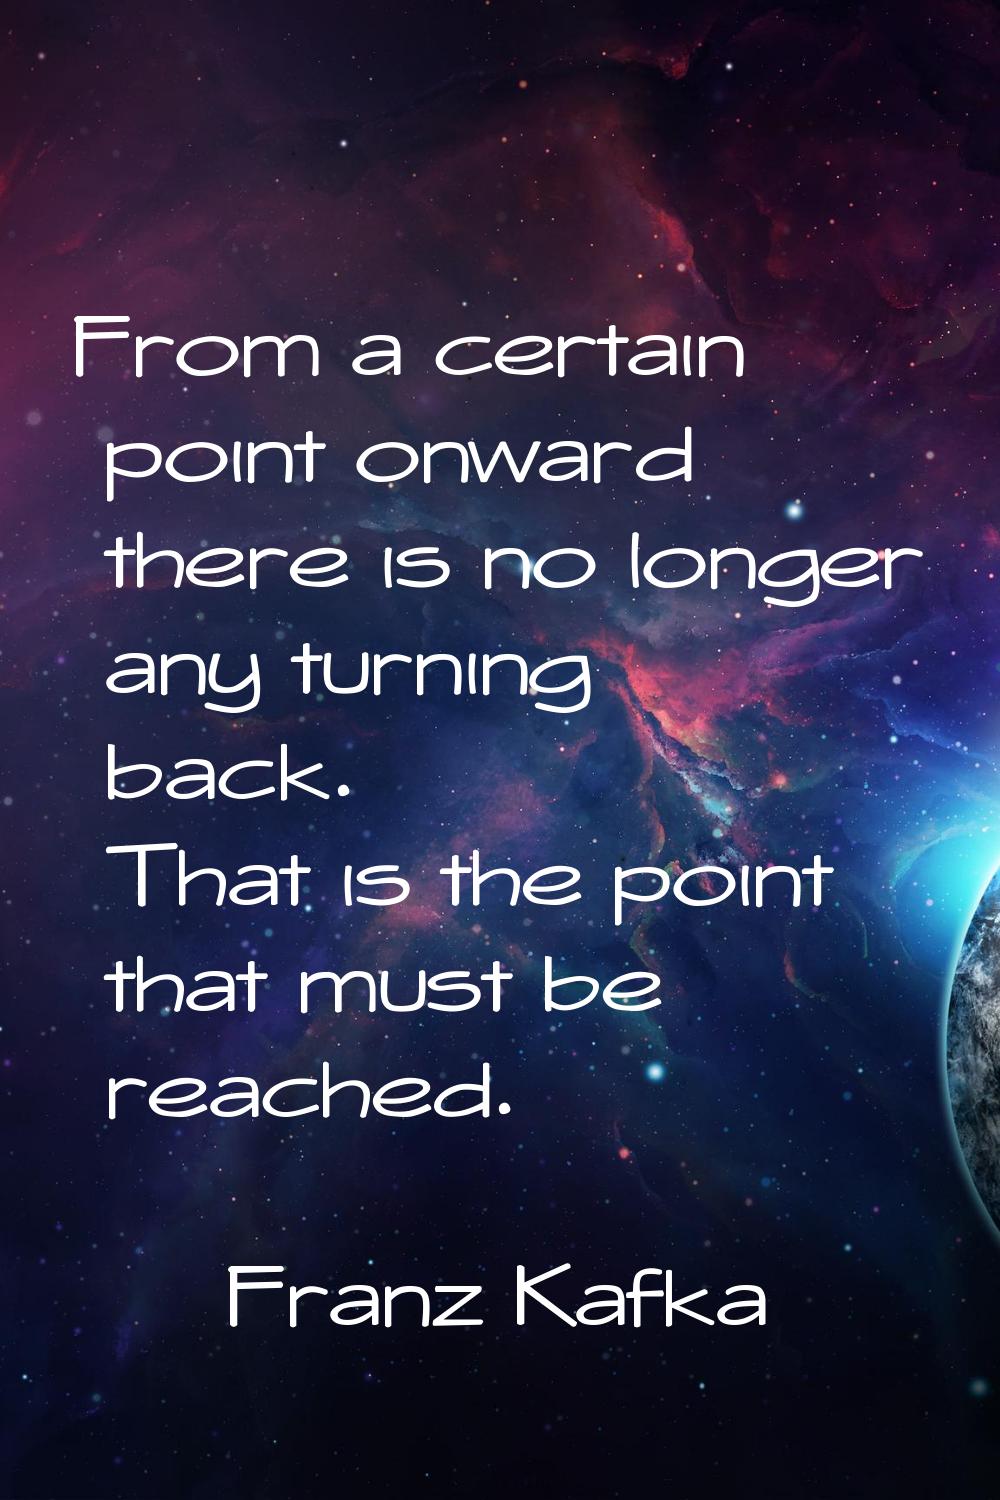 From a certain point onward there is no longer any turning back. That is the point that must be rea